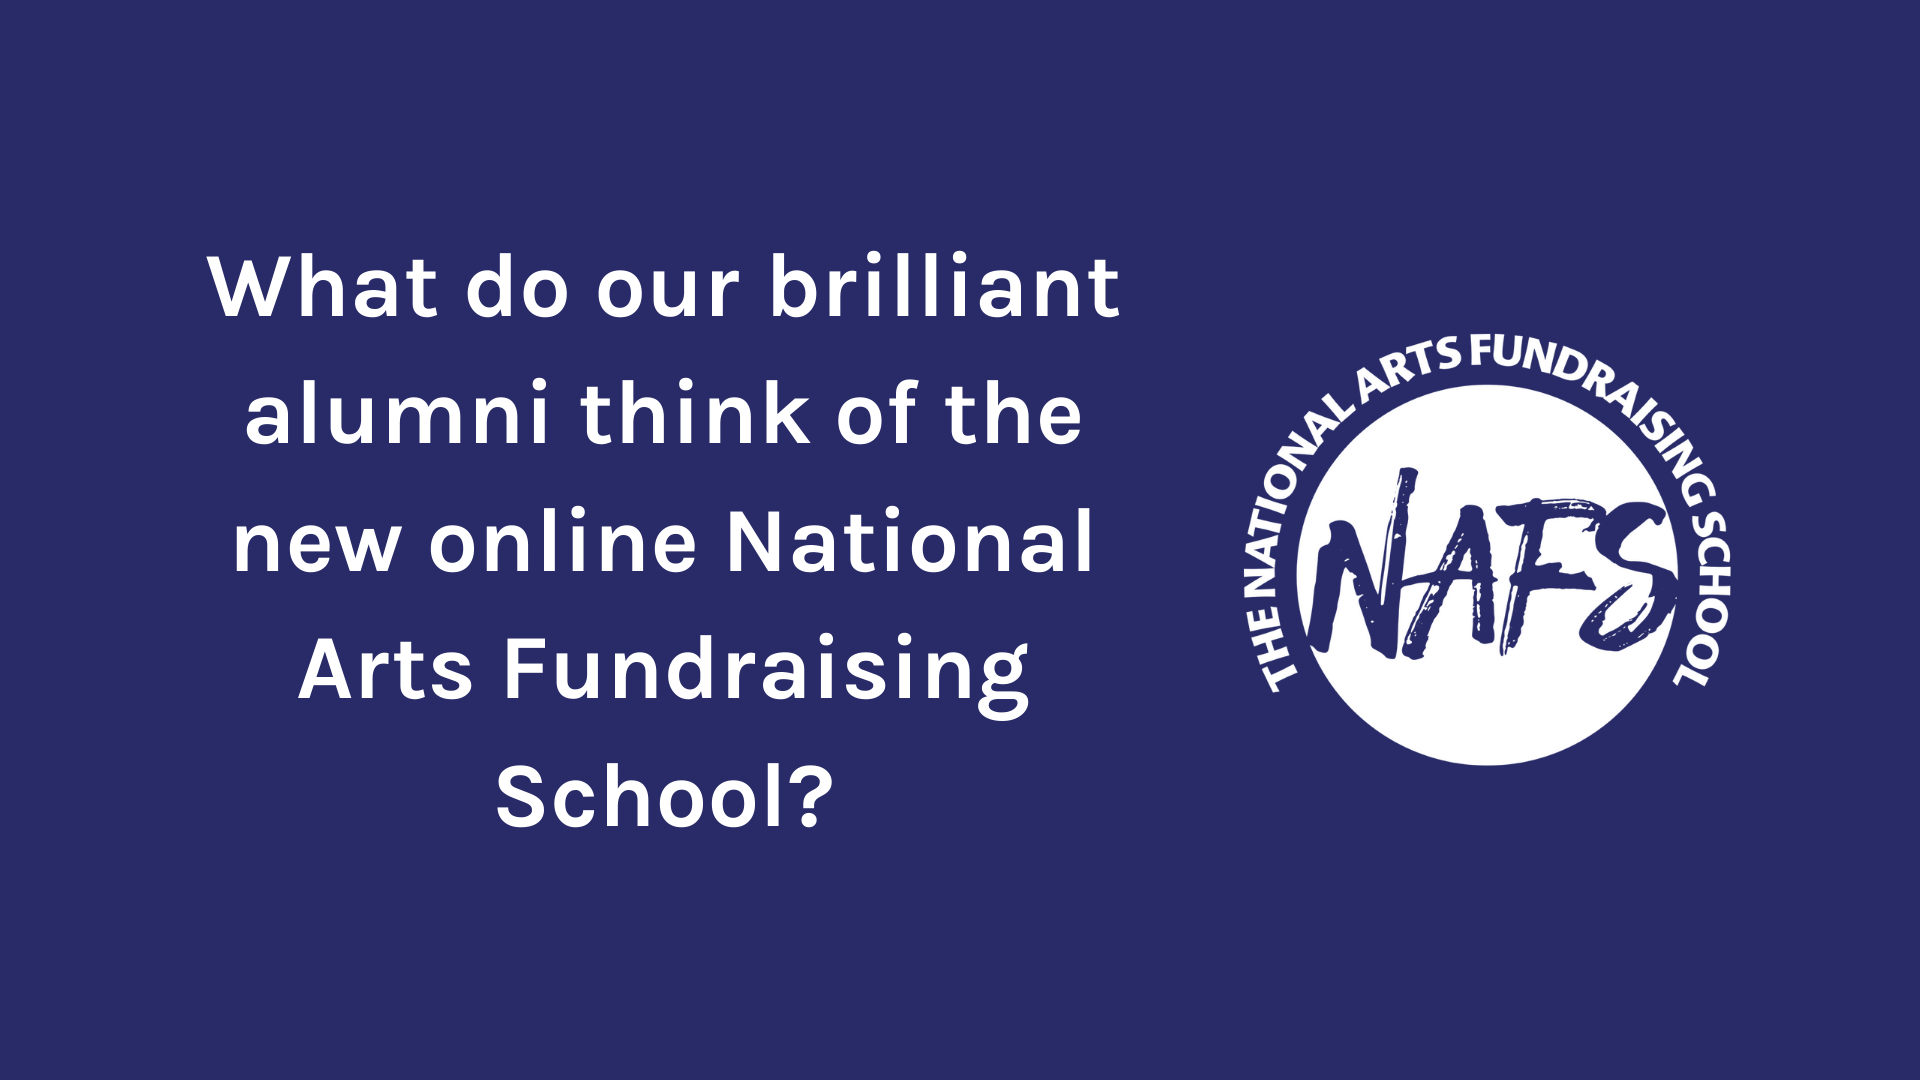 What do our brilliant alumni think of NAFS online?